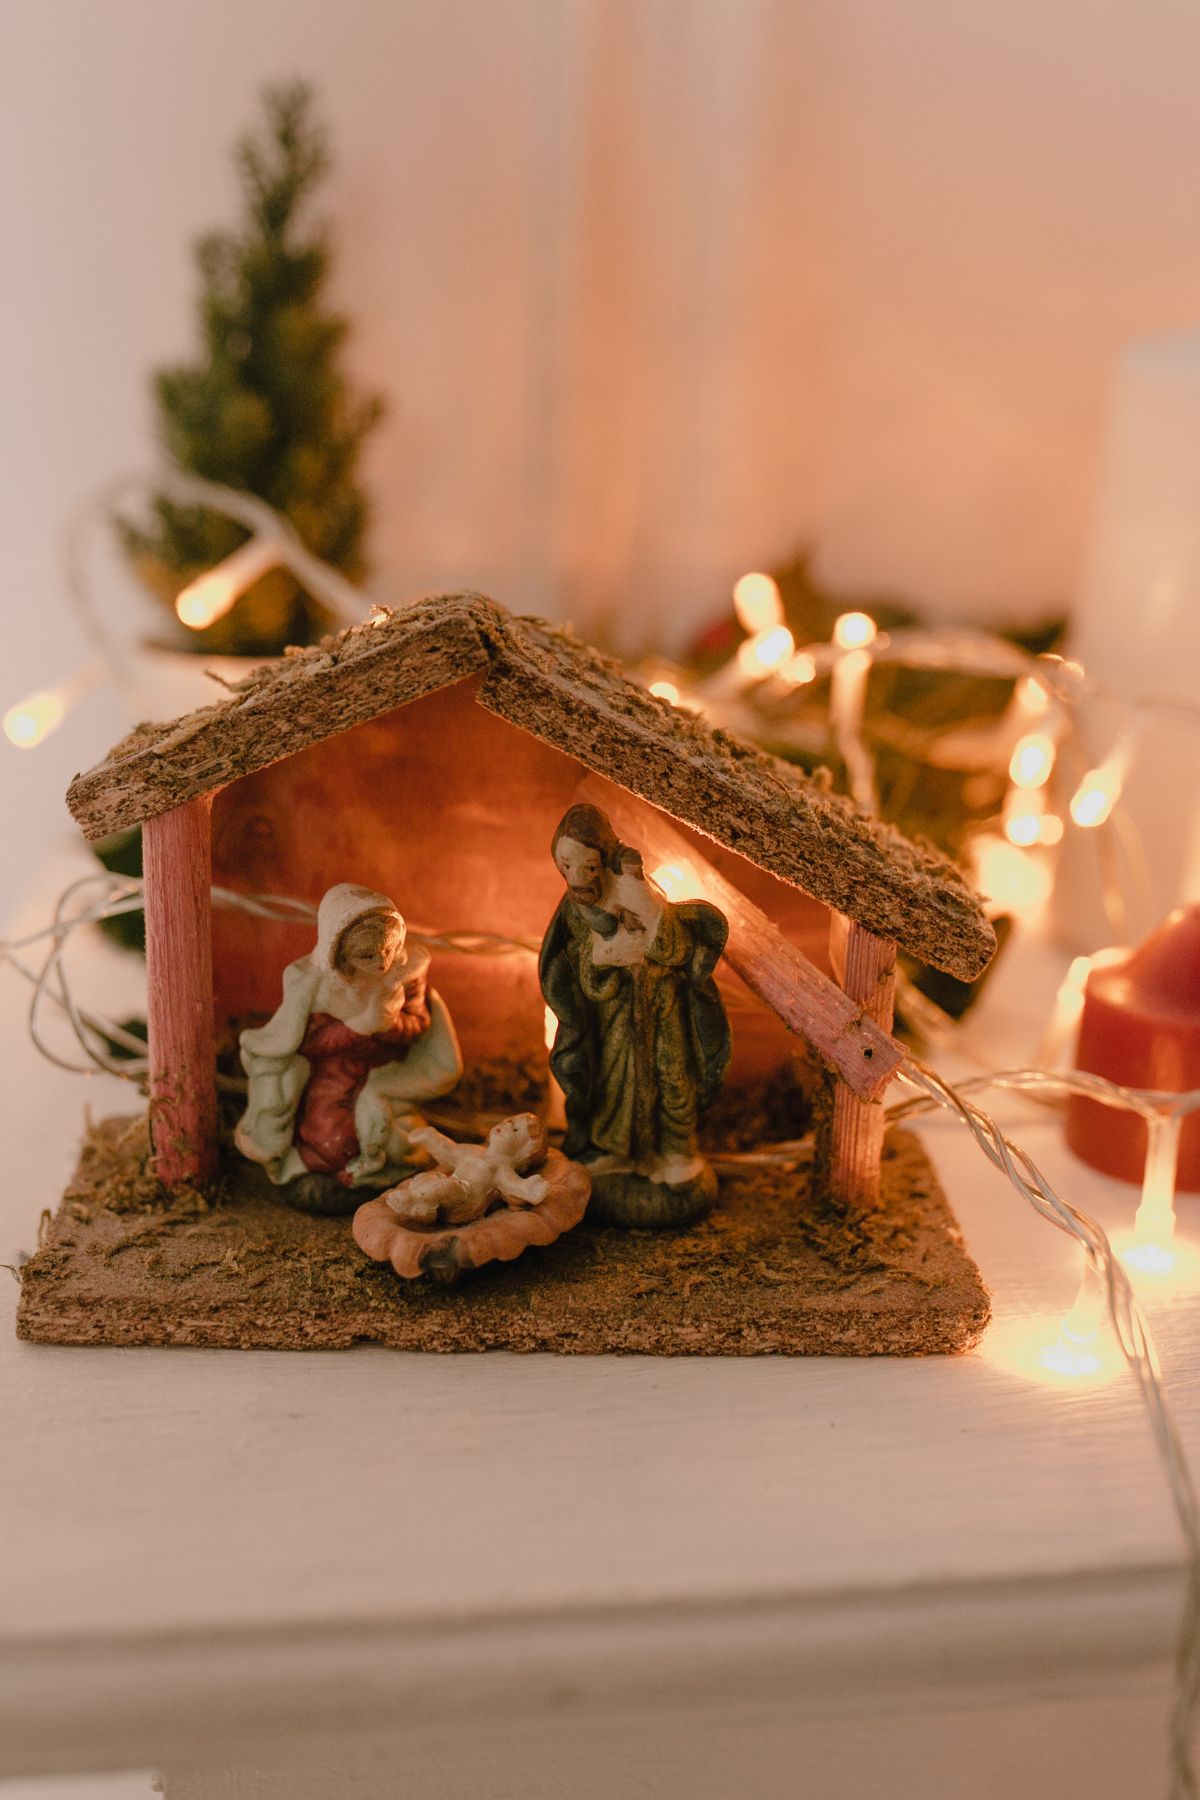 A a small nativity scene on a table with Christmas lights in the background.